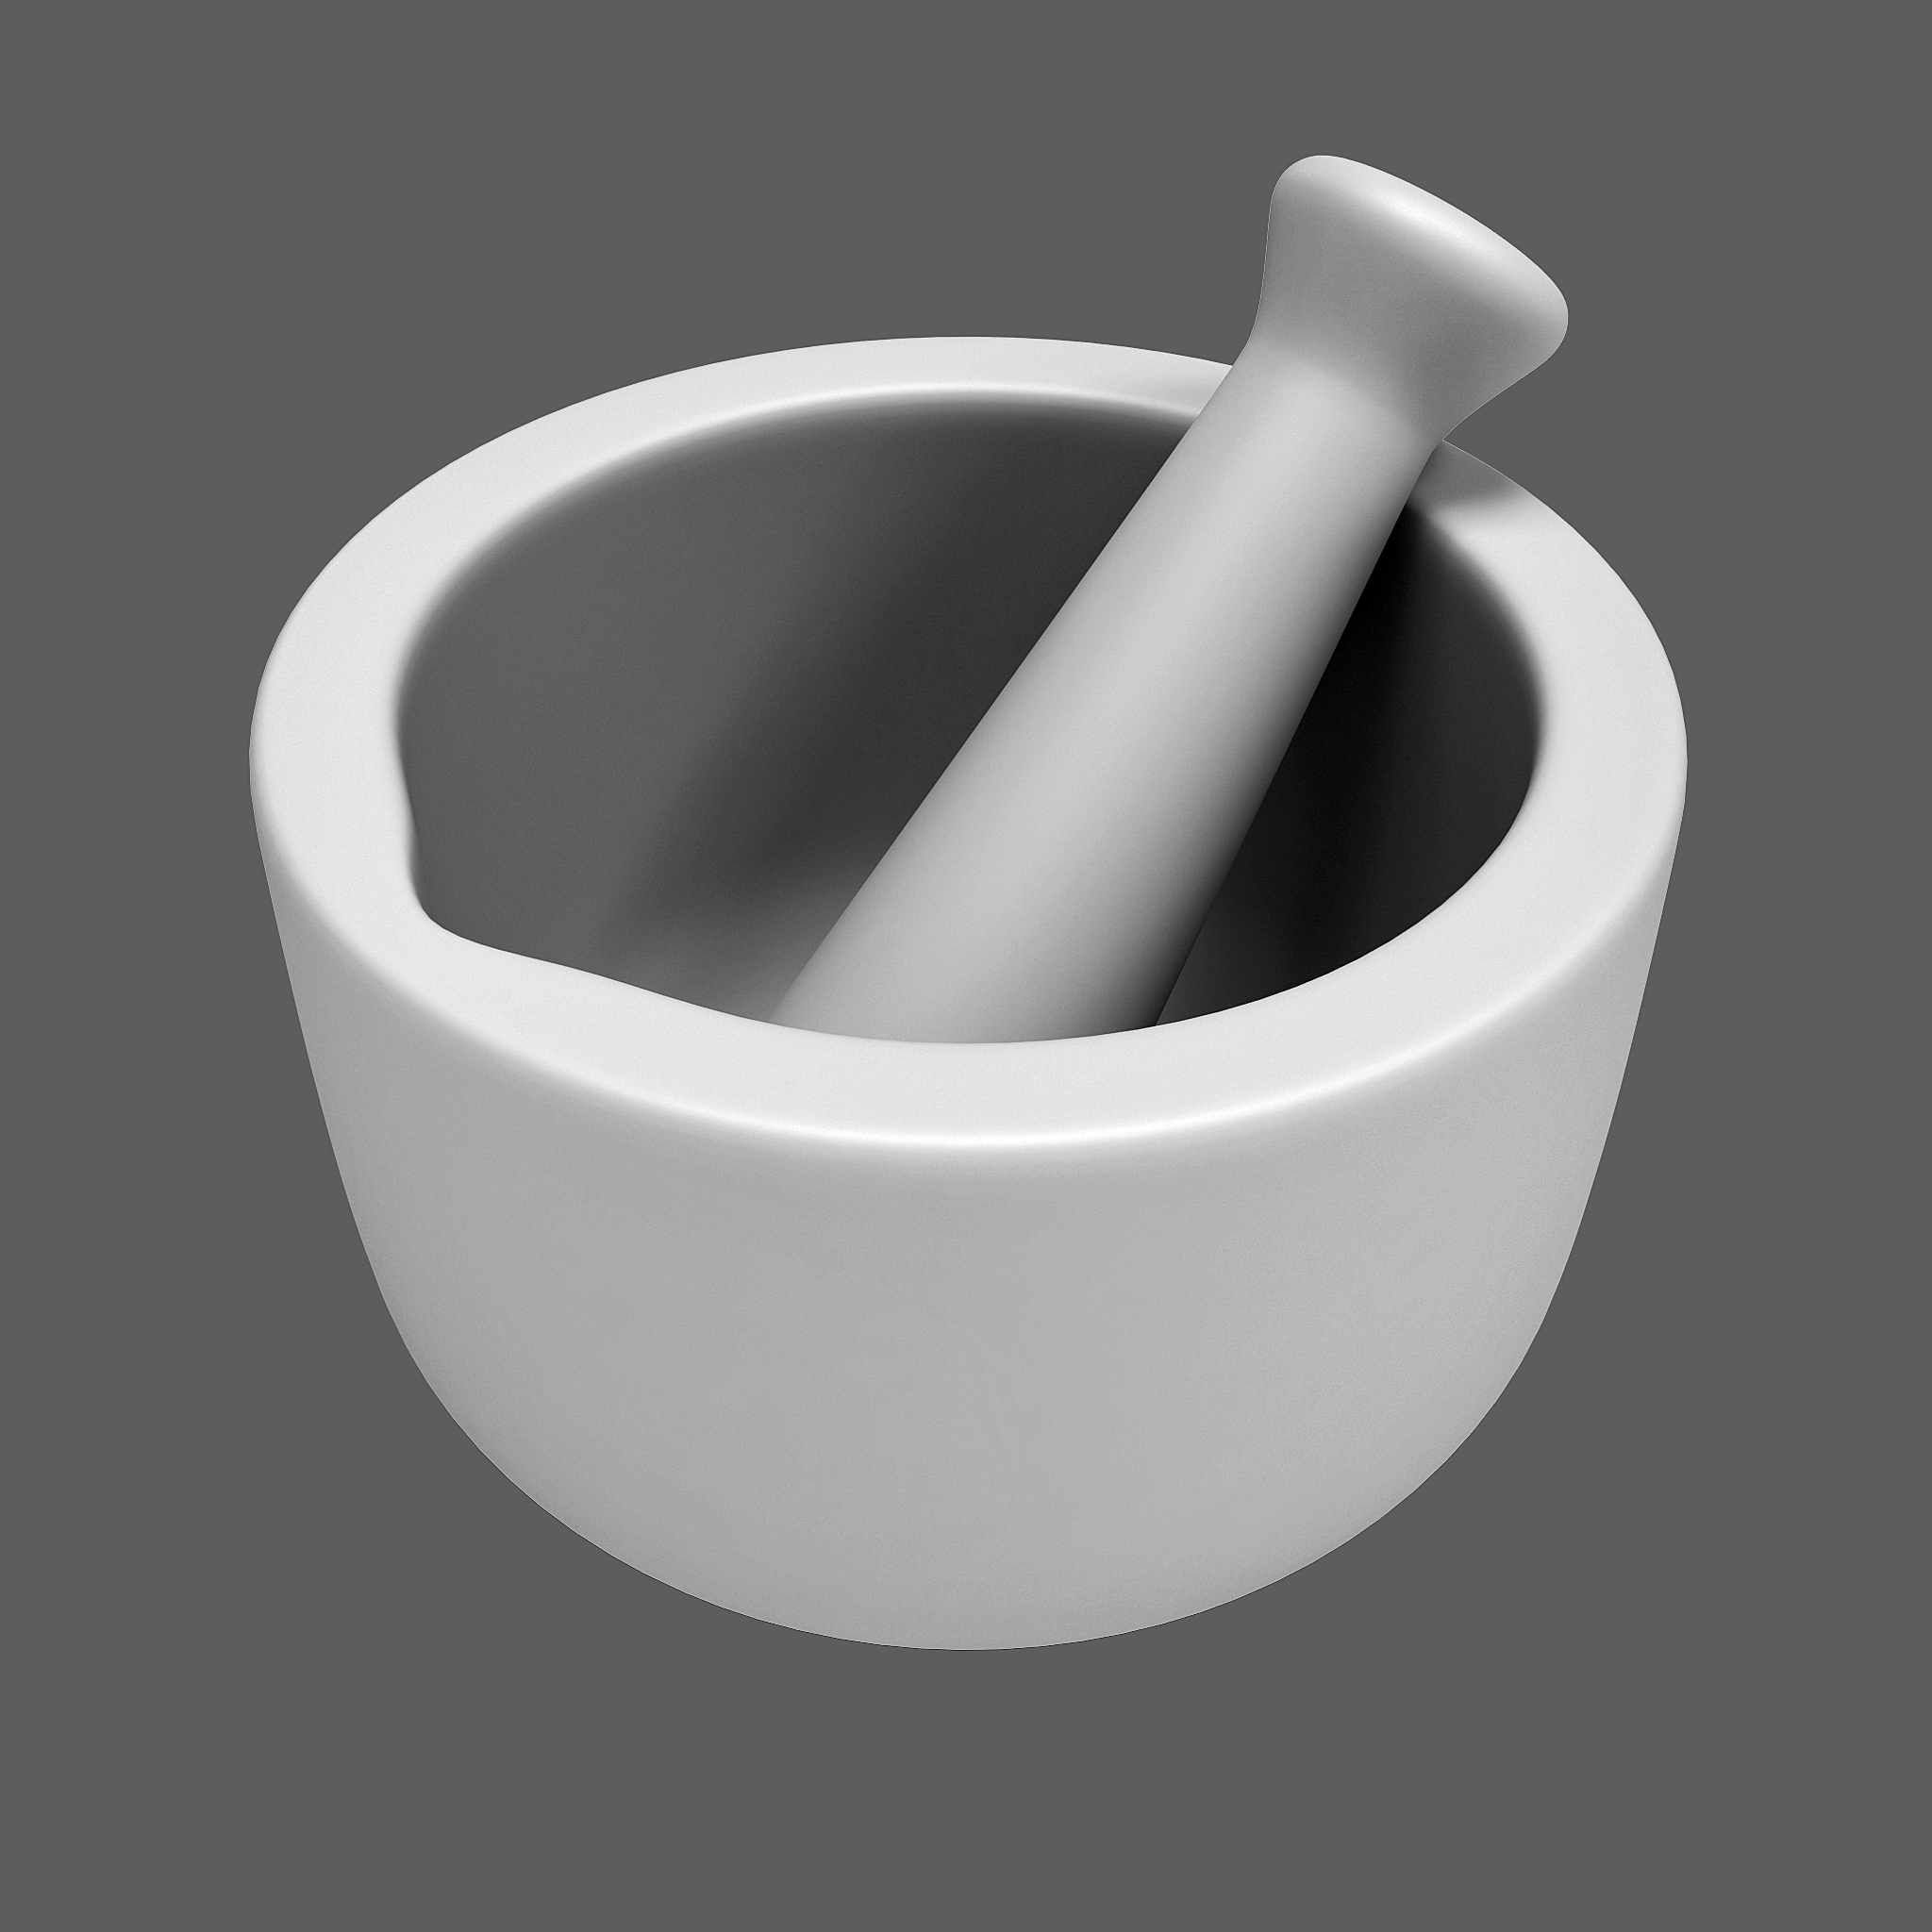 Mortar and Pestle Chemistry